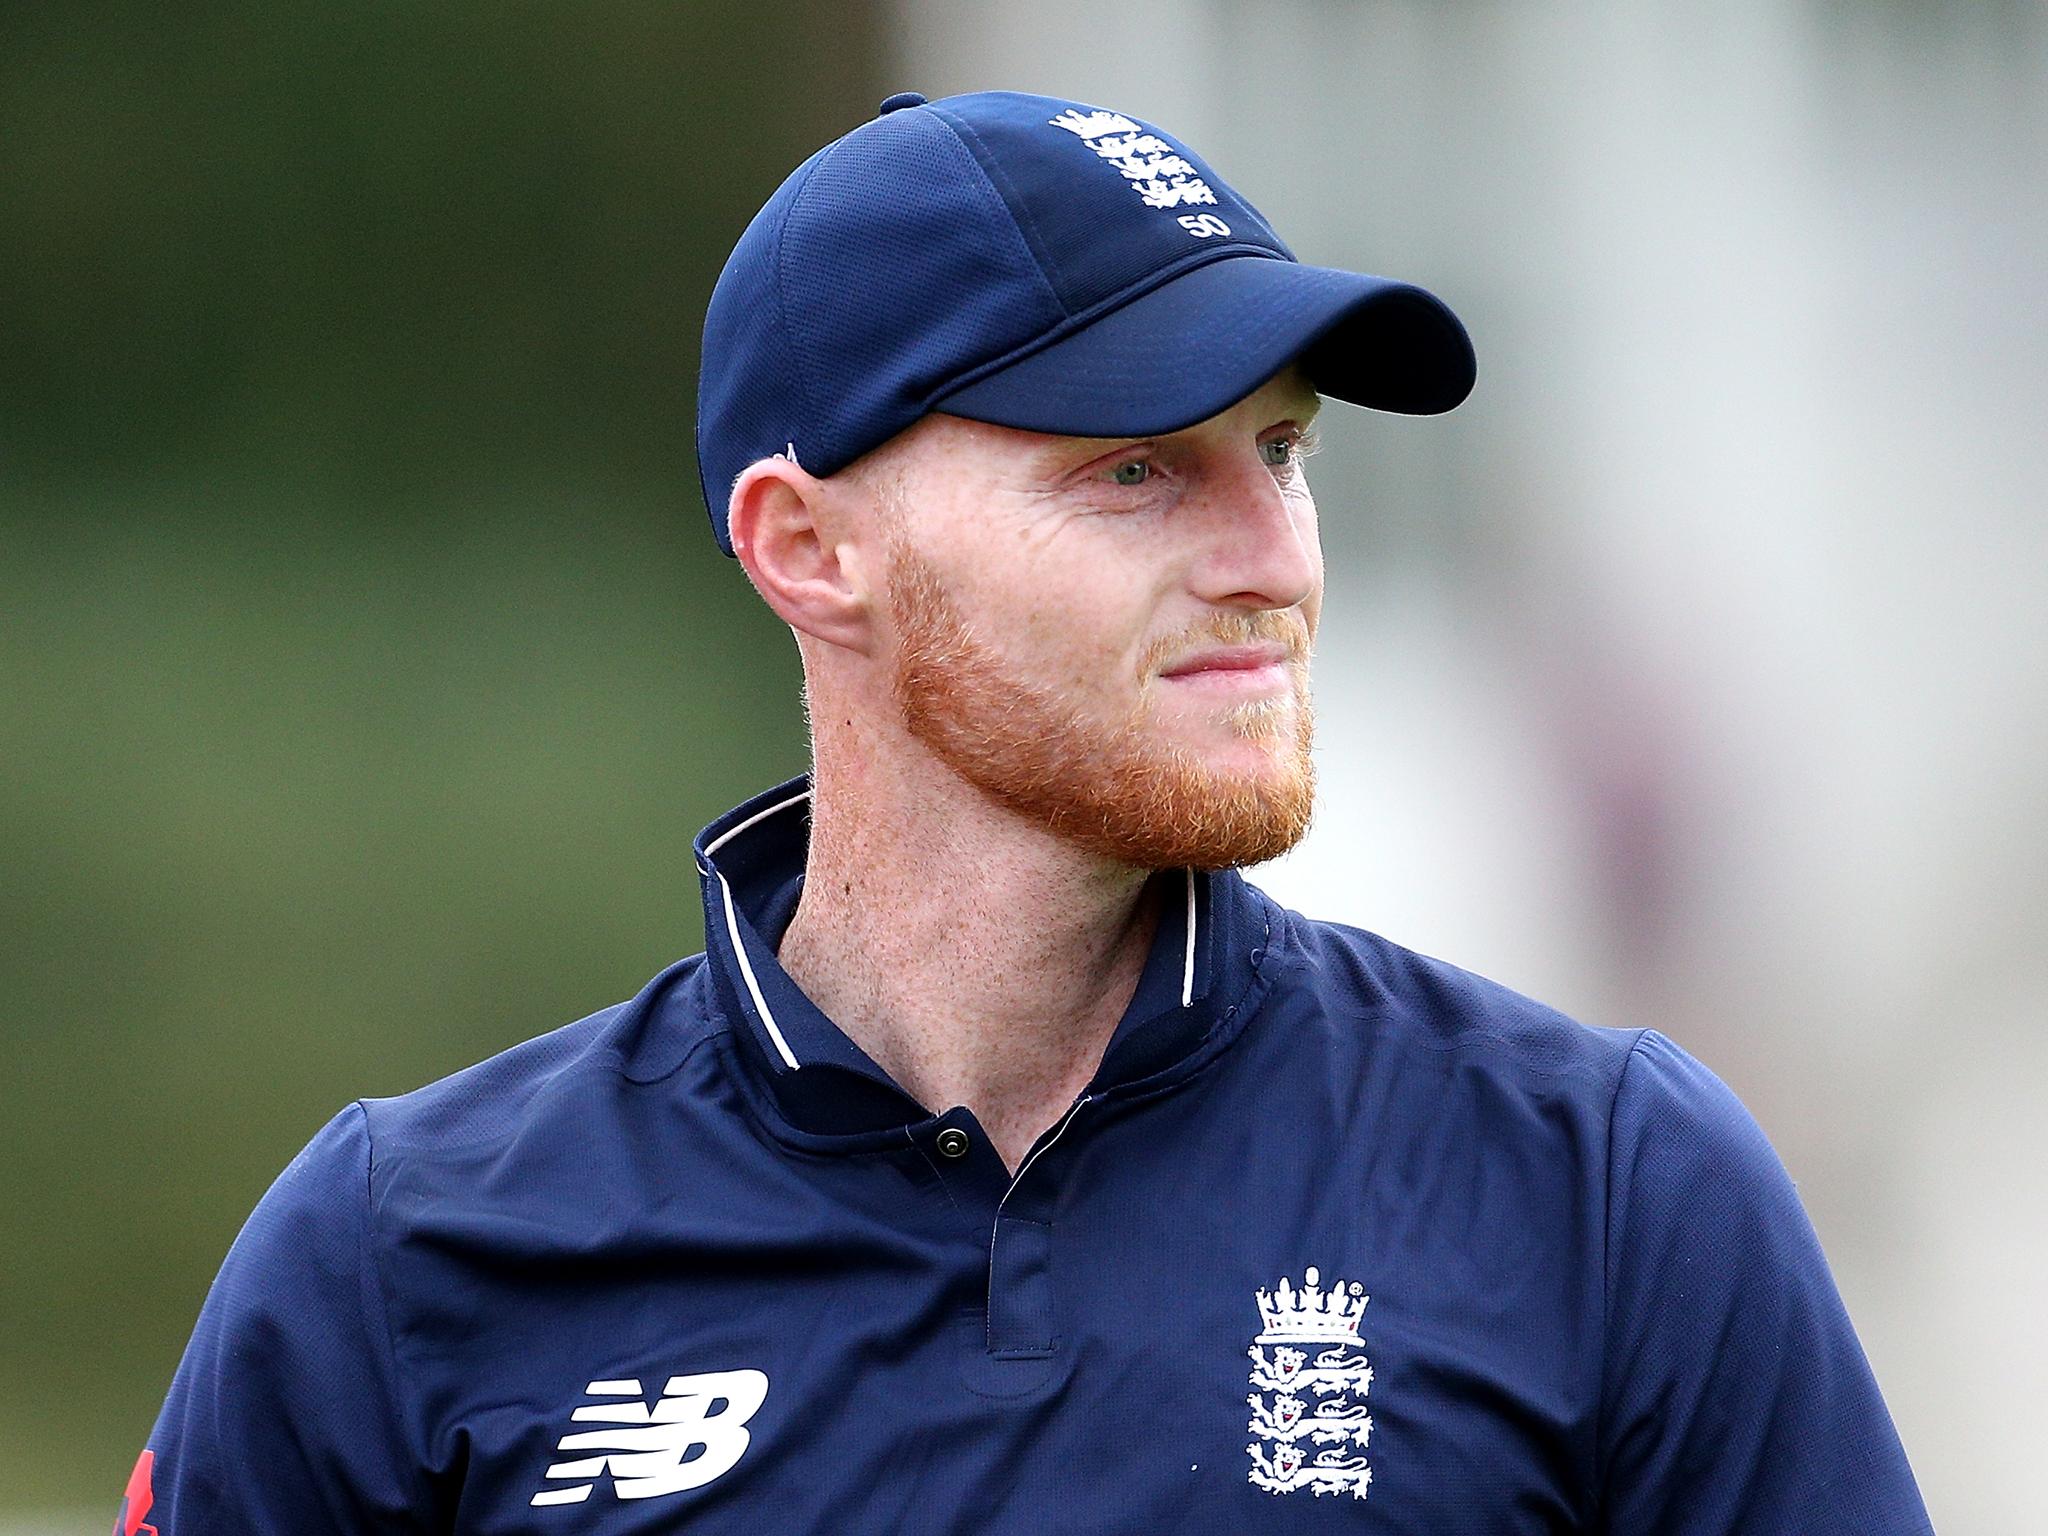 Stokes looks set to be fit for the first Test